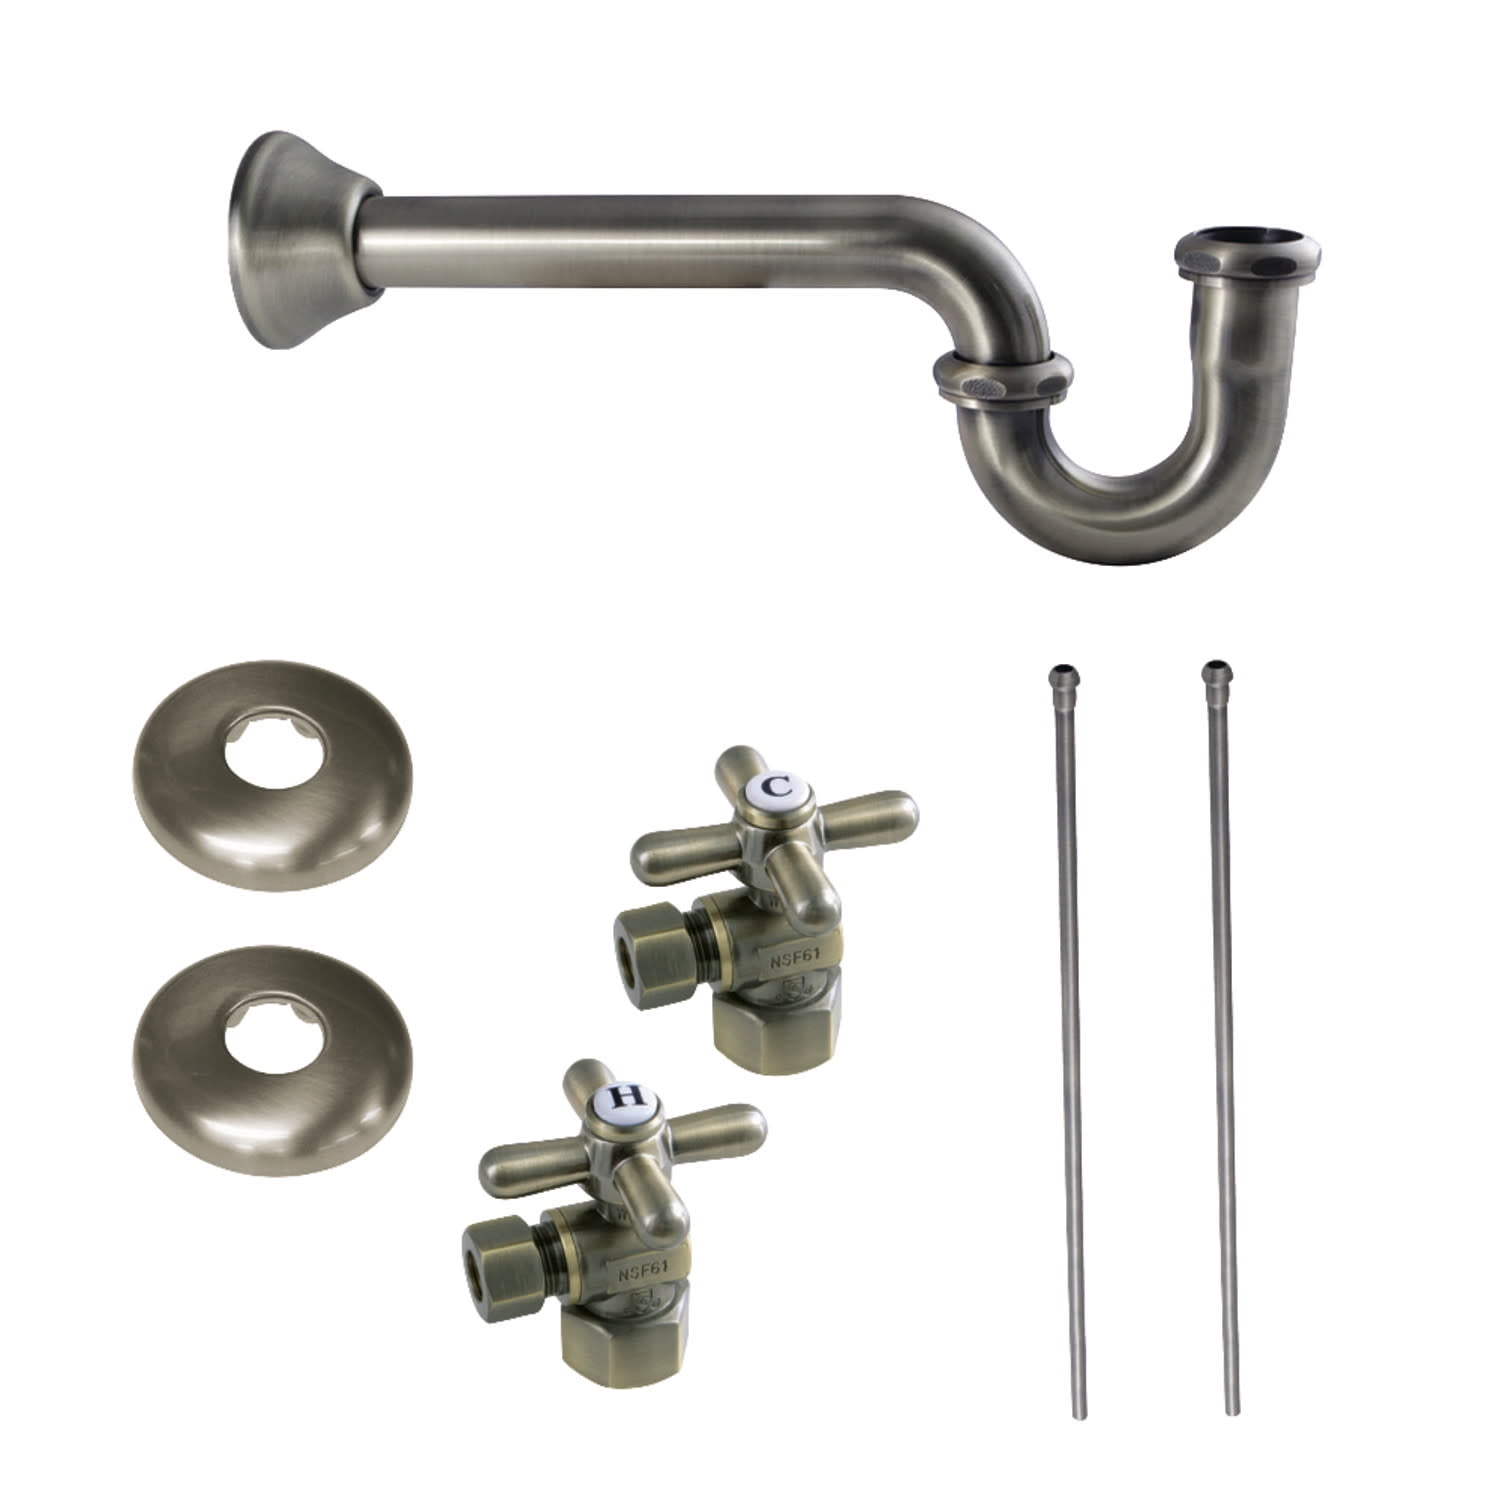 3/8-Inch Comp Outlet Polished Brass 1/2-Inch IPS Inlet Kingston Brass KPK102P Trimscape Plumbing Supply Kits Combo